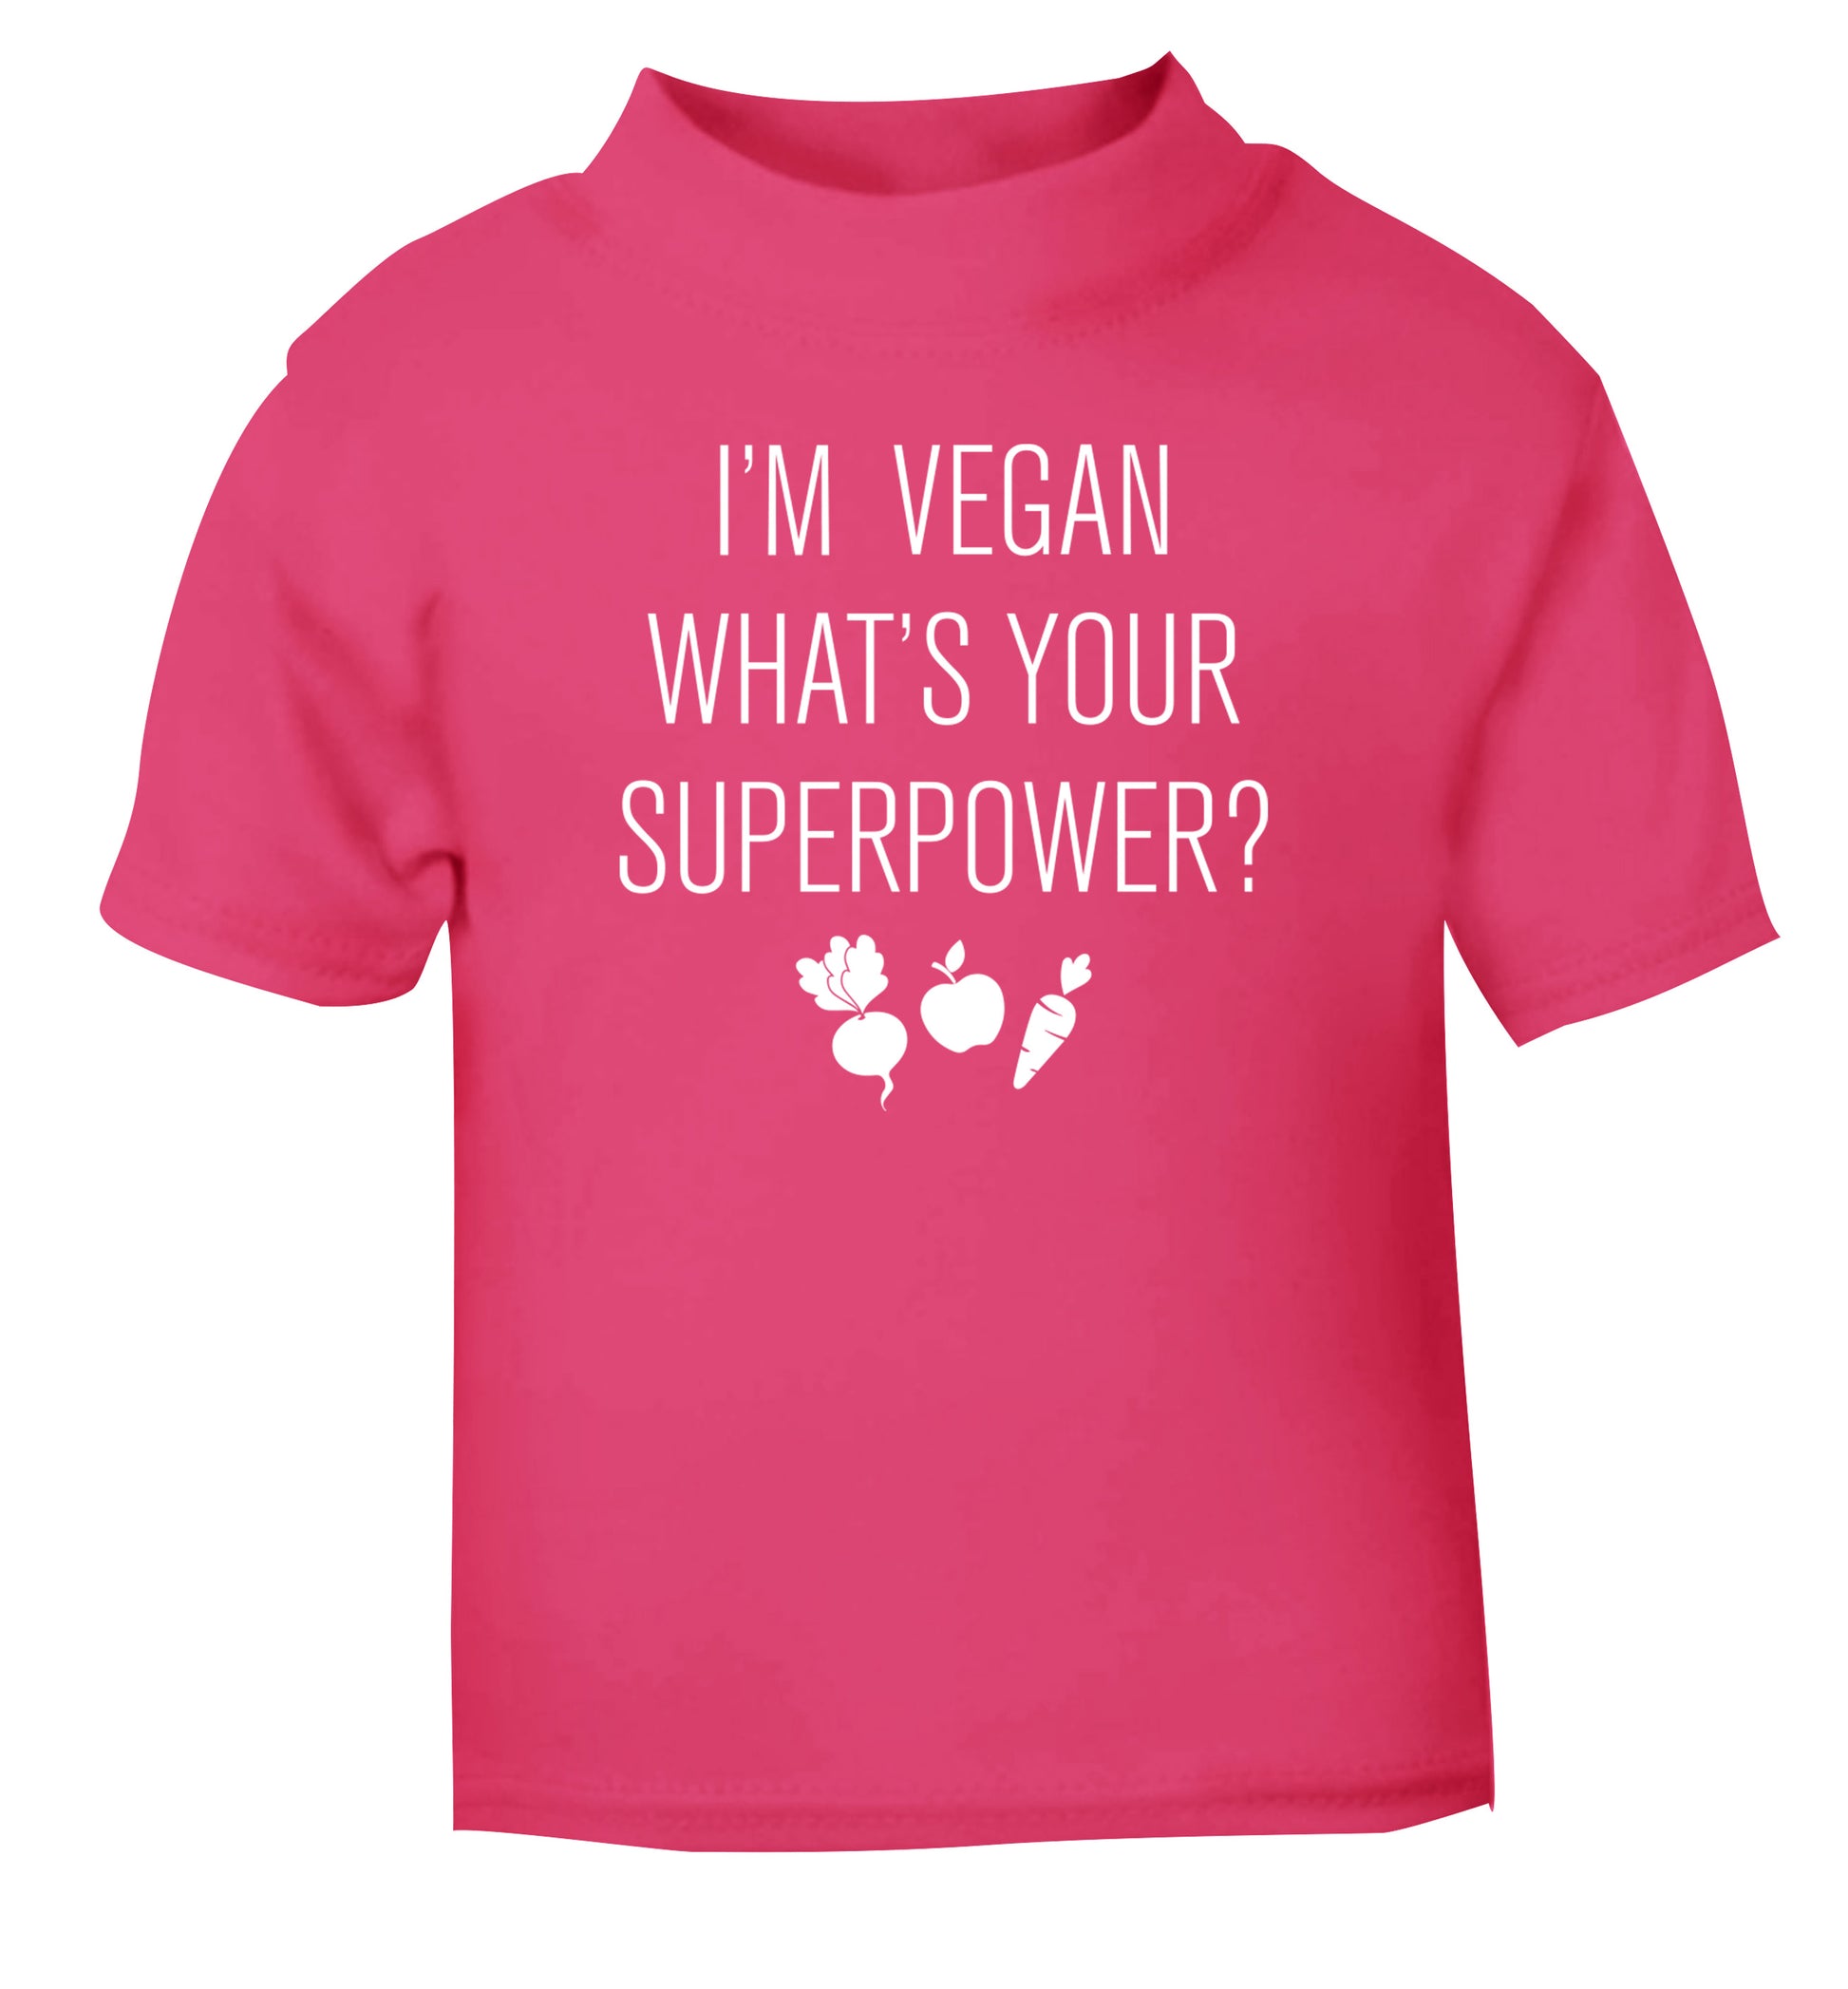 I'm Vegan What's Your Superpower? pink Baby Toddler Tshirt 2 Years